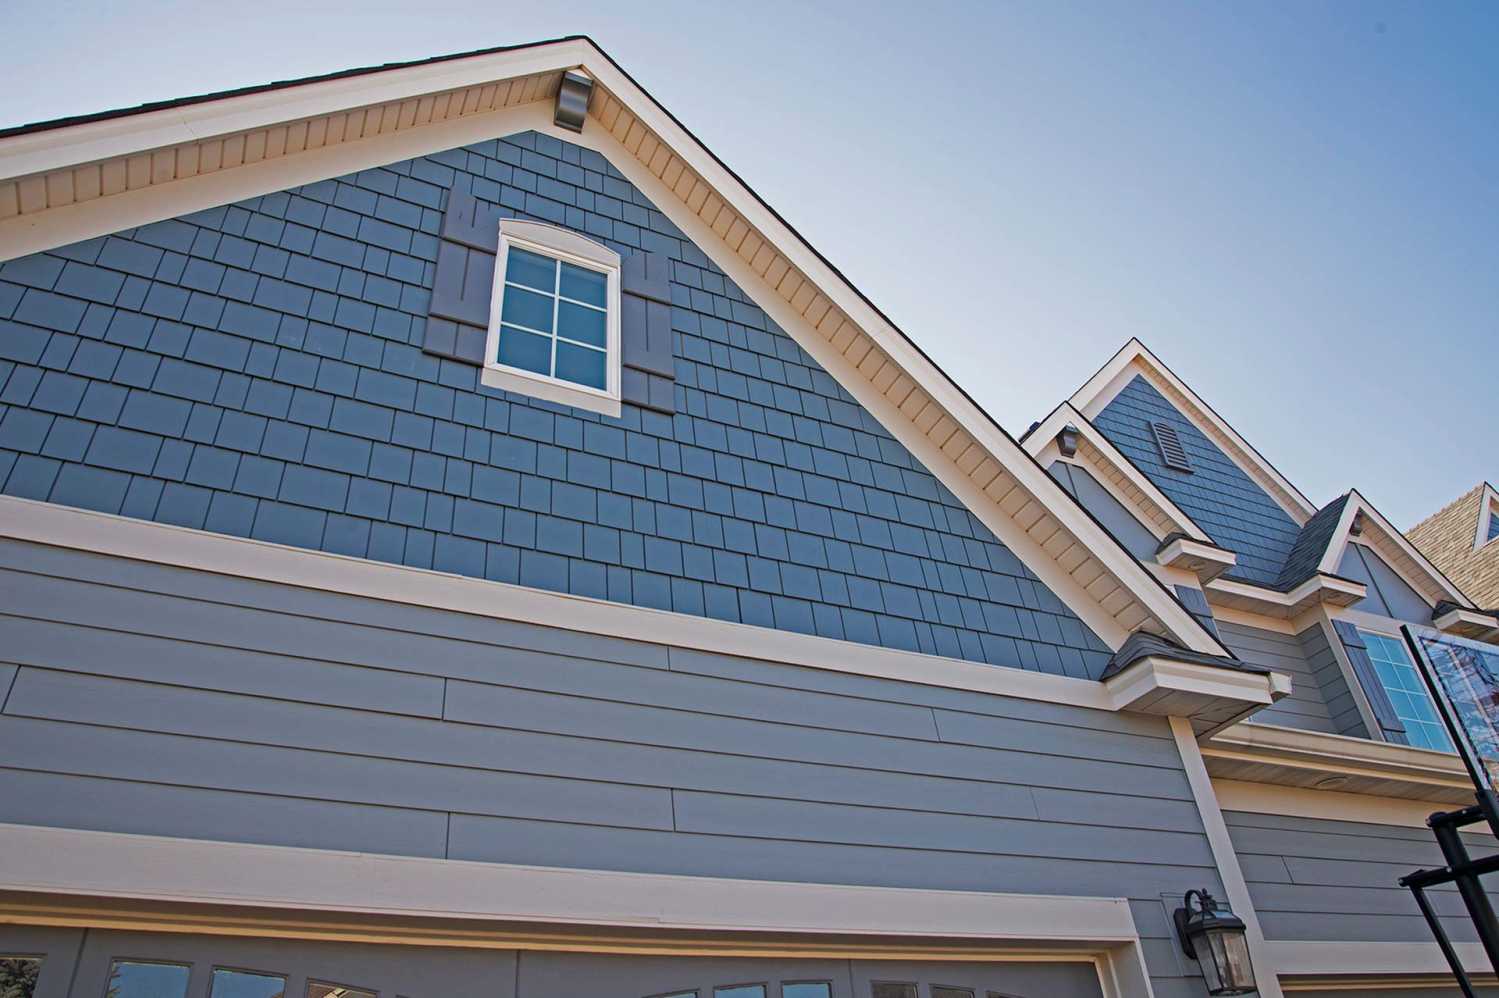 Pros and Cons of Hardie Board Siding